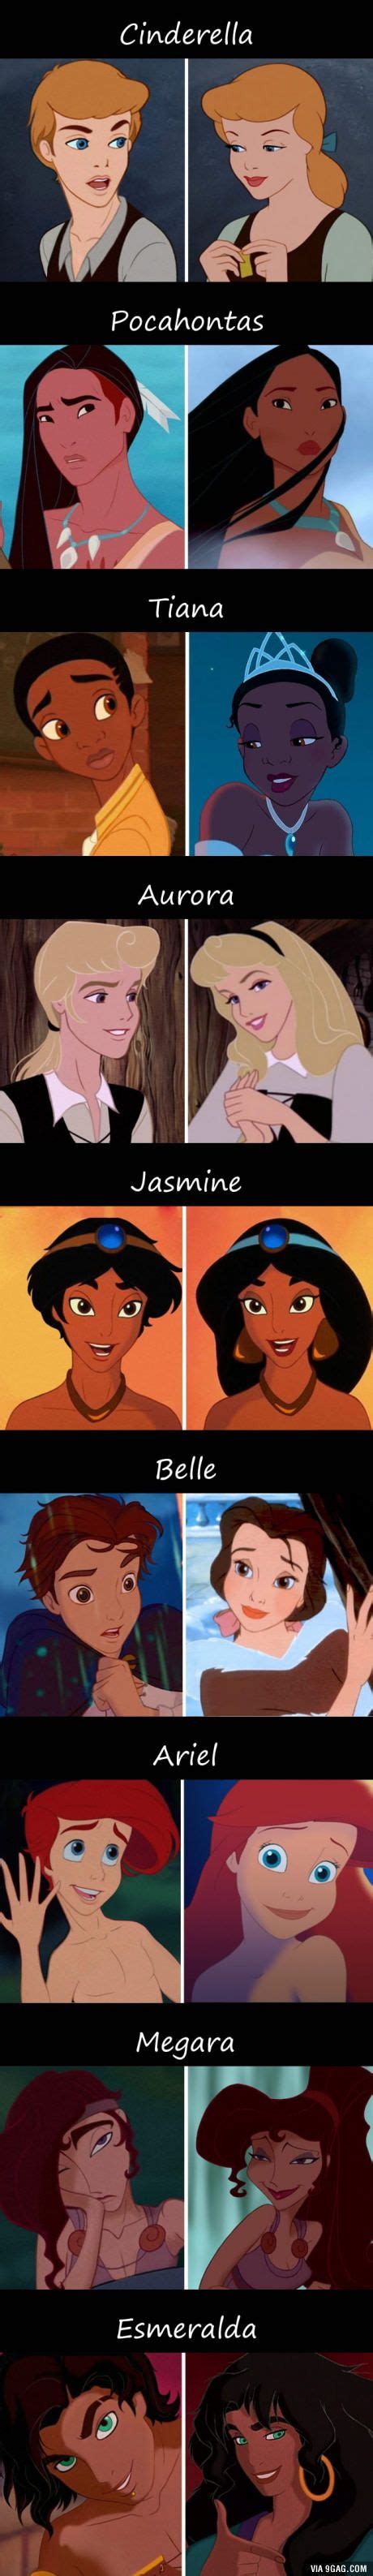 If Disney Princesses Were Real This Is How They Look